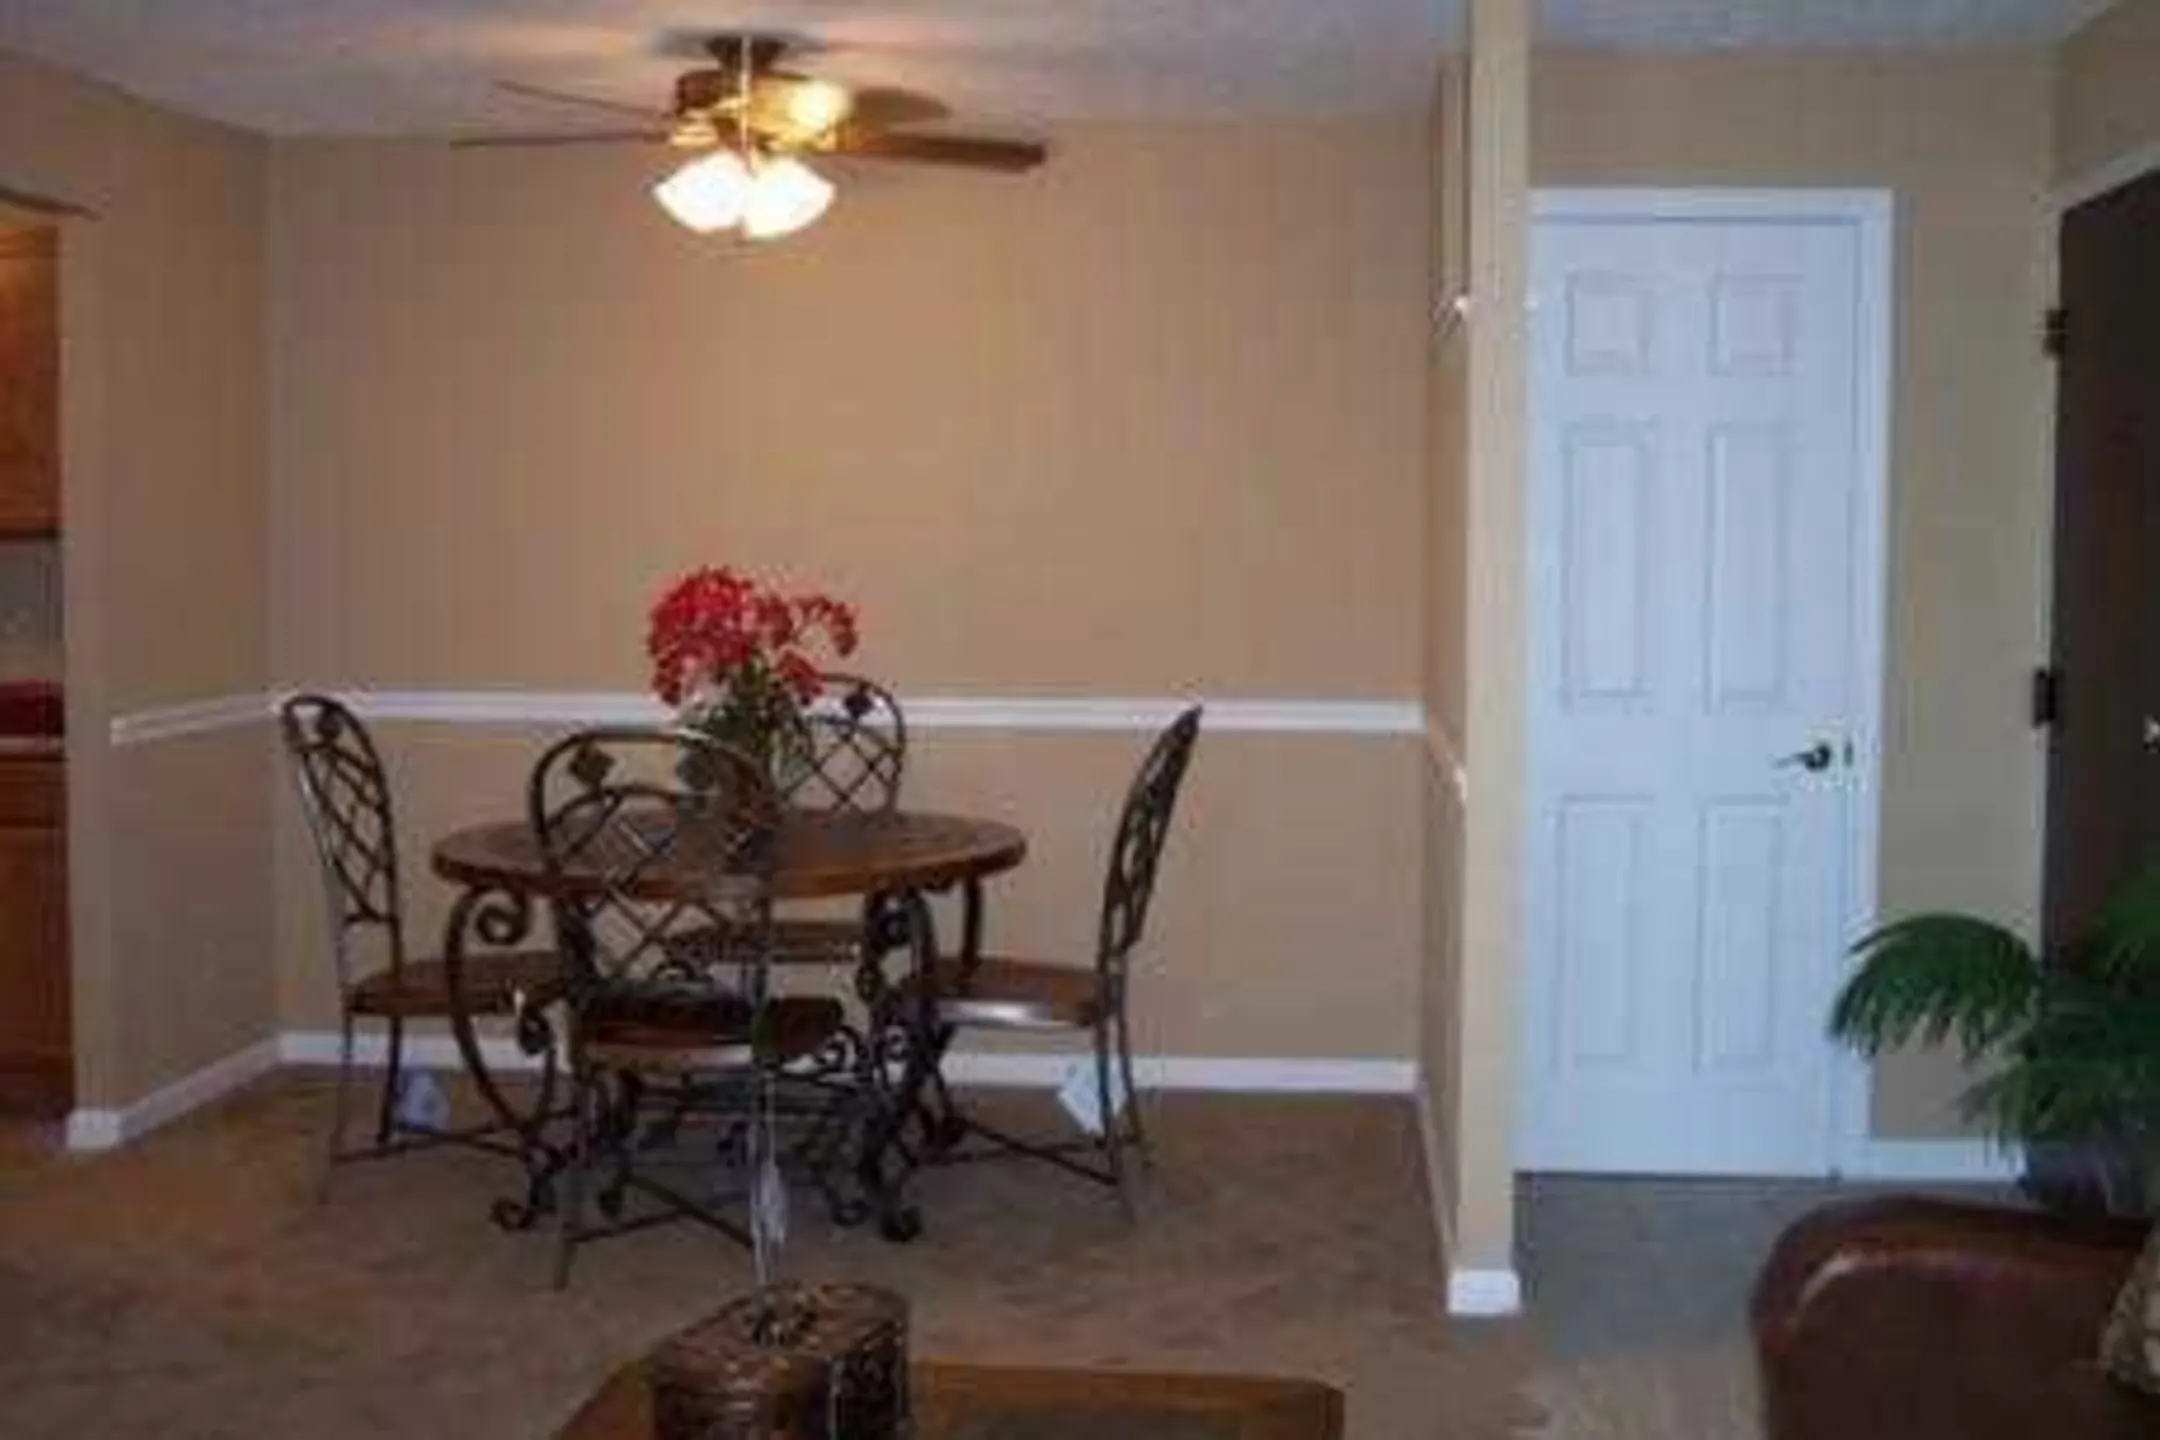 Dining Room - Harbor View Apartments - Addyston, OH